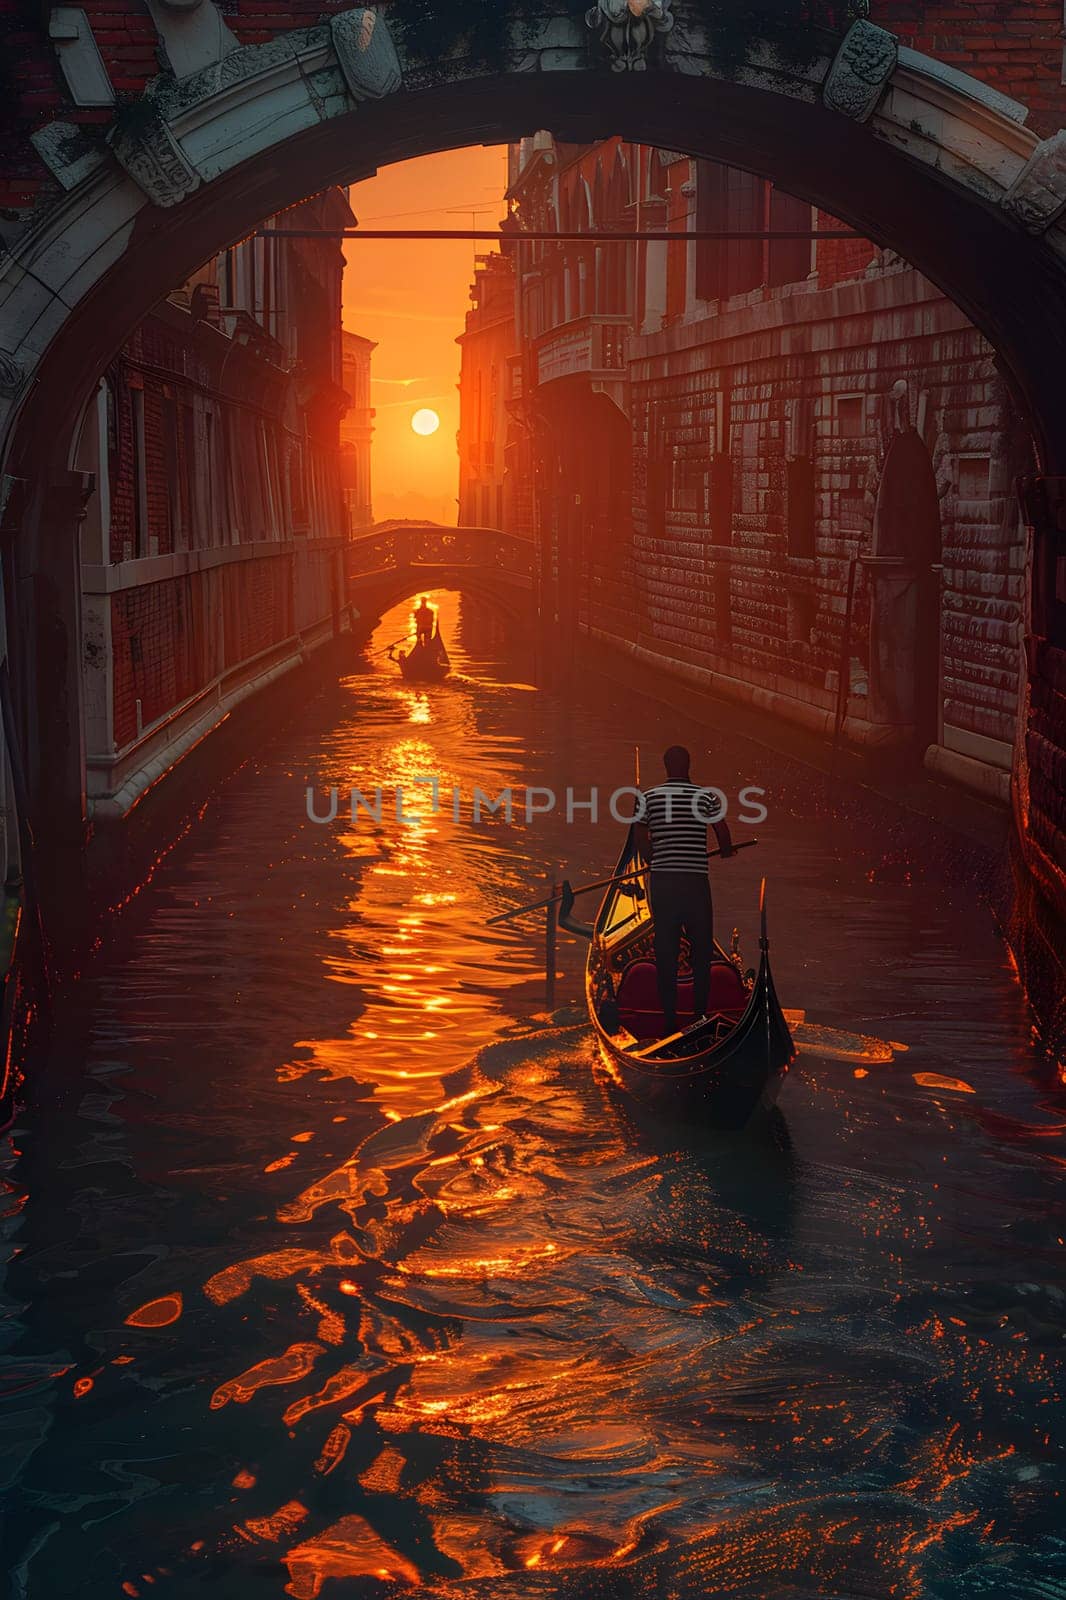 Man in boat, reflecting arches on water, at sunset in atmospheric evening by Nadtochiy